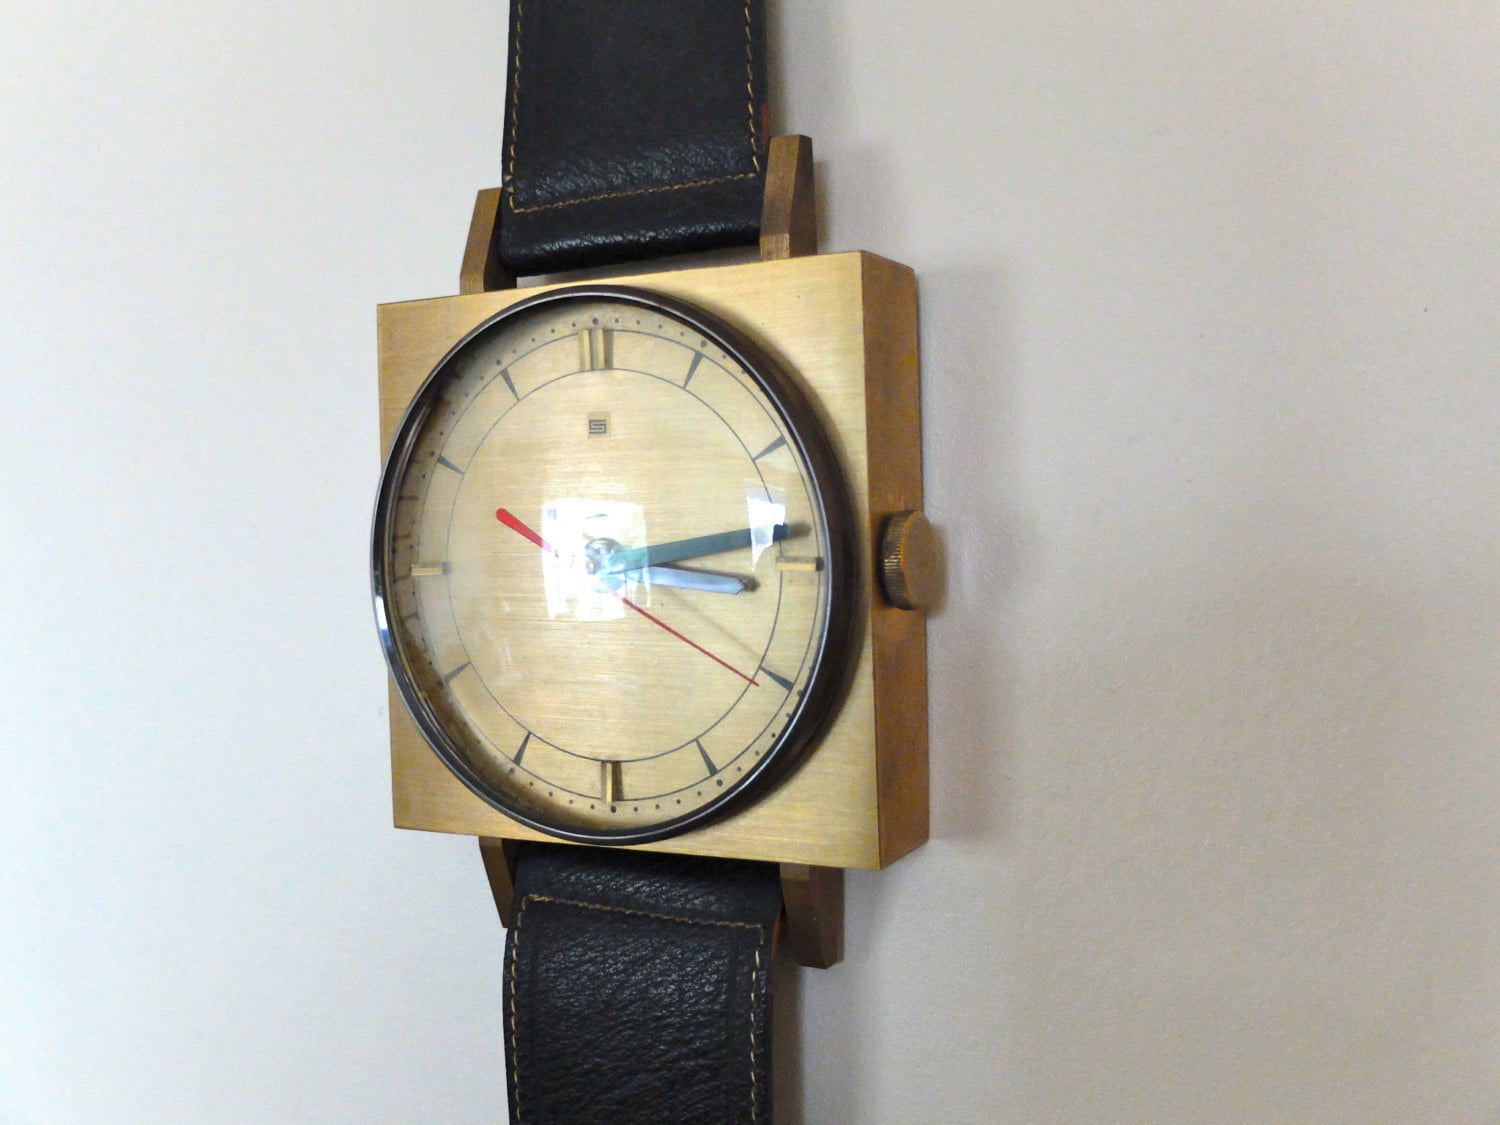 Vintage wall clock : GIANT WRIST WATCH brass and leather